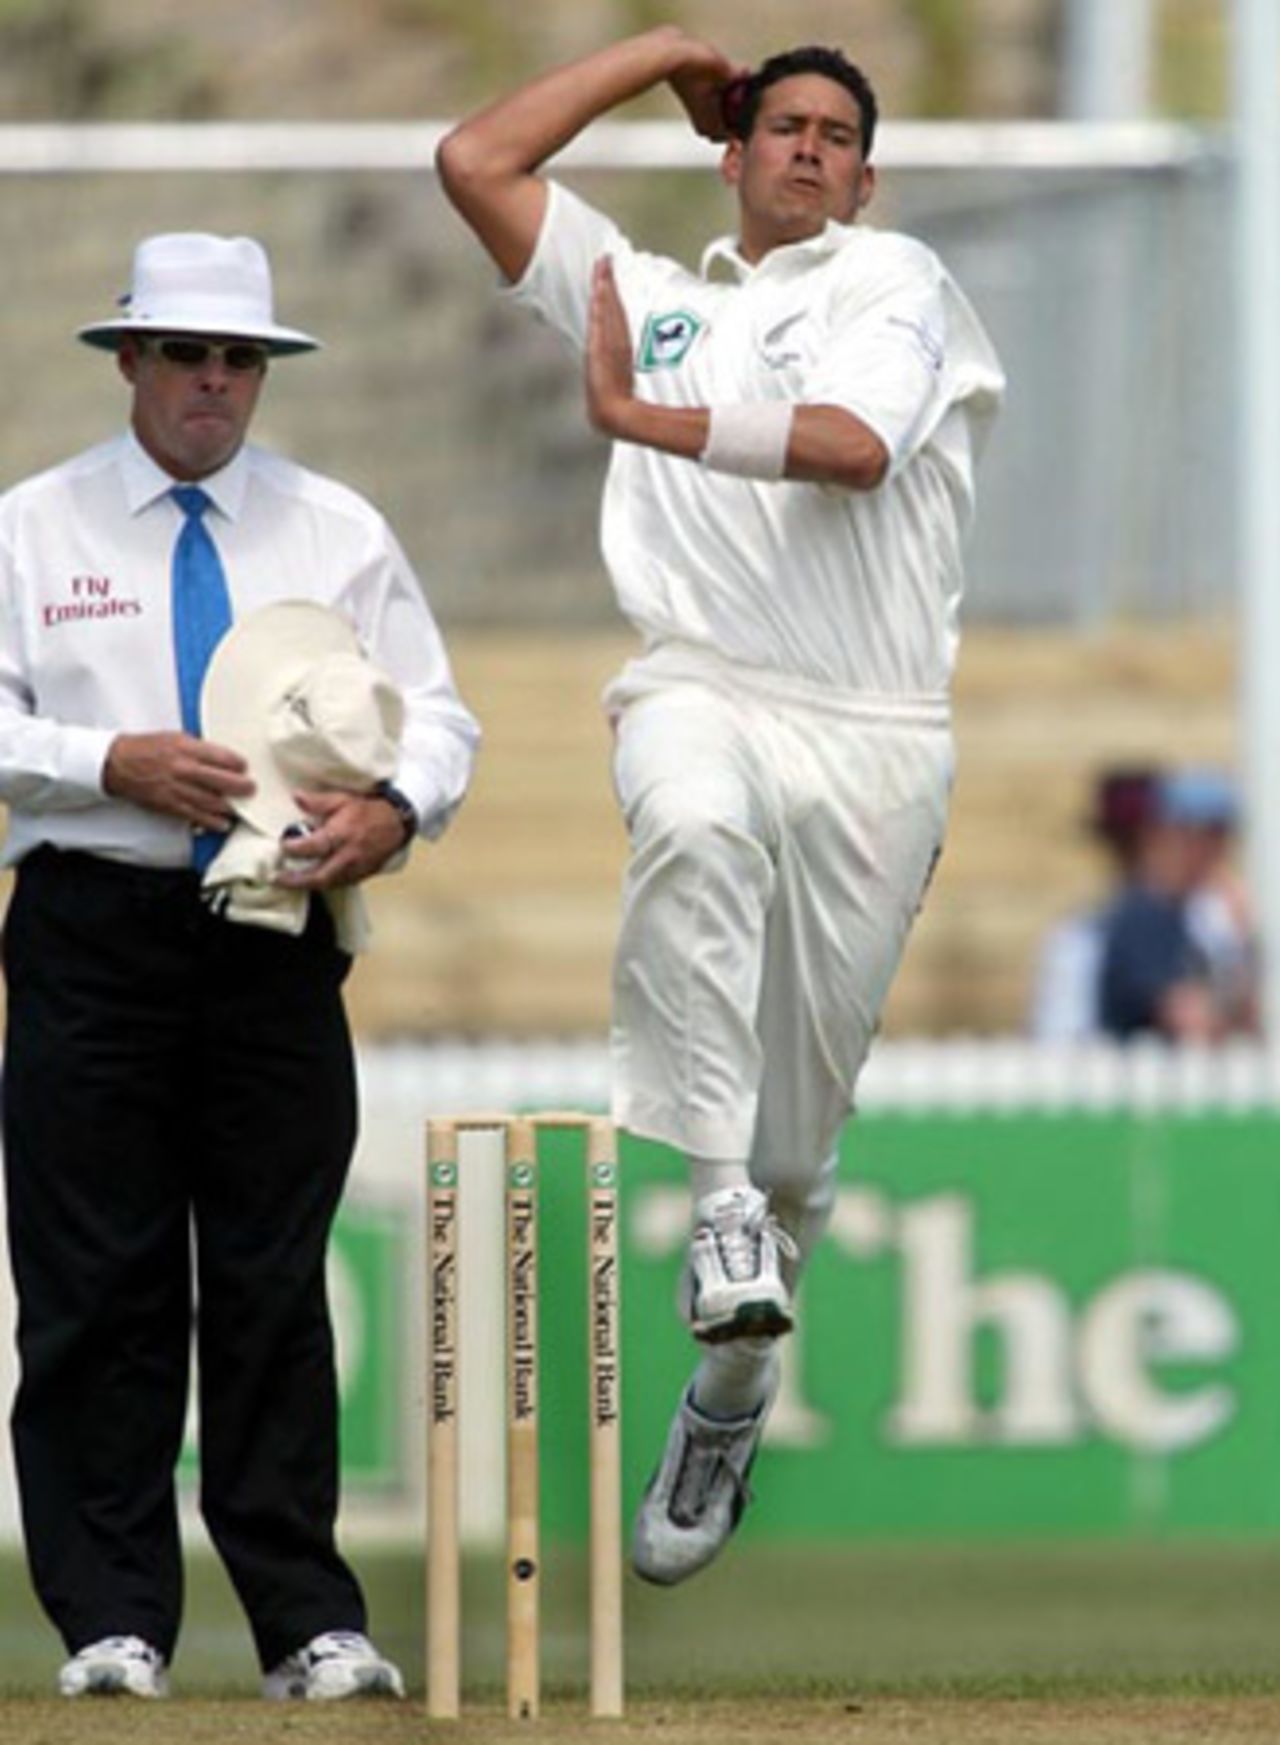 New Zealand bowler Daryl Tuffey delivers a ball during his spell of 4-41 from 16 overs in the second innings as umpire Daryl Harper looks on. 2nd Test: New Zealand v India at Westpac Park, Hamilton, 19-23 December 2002 (21 December 2002).